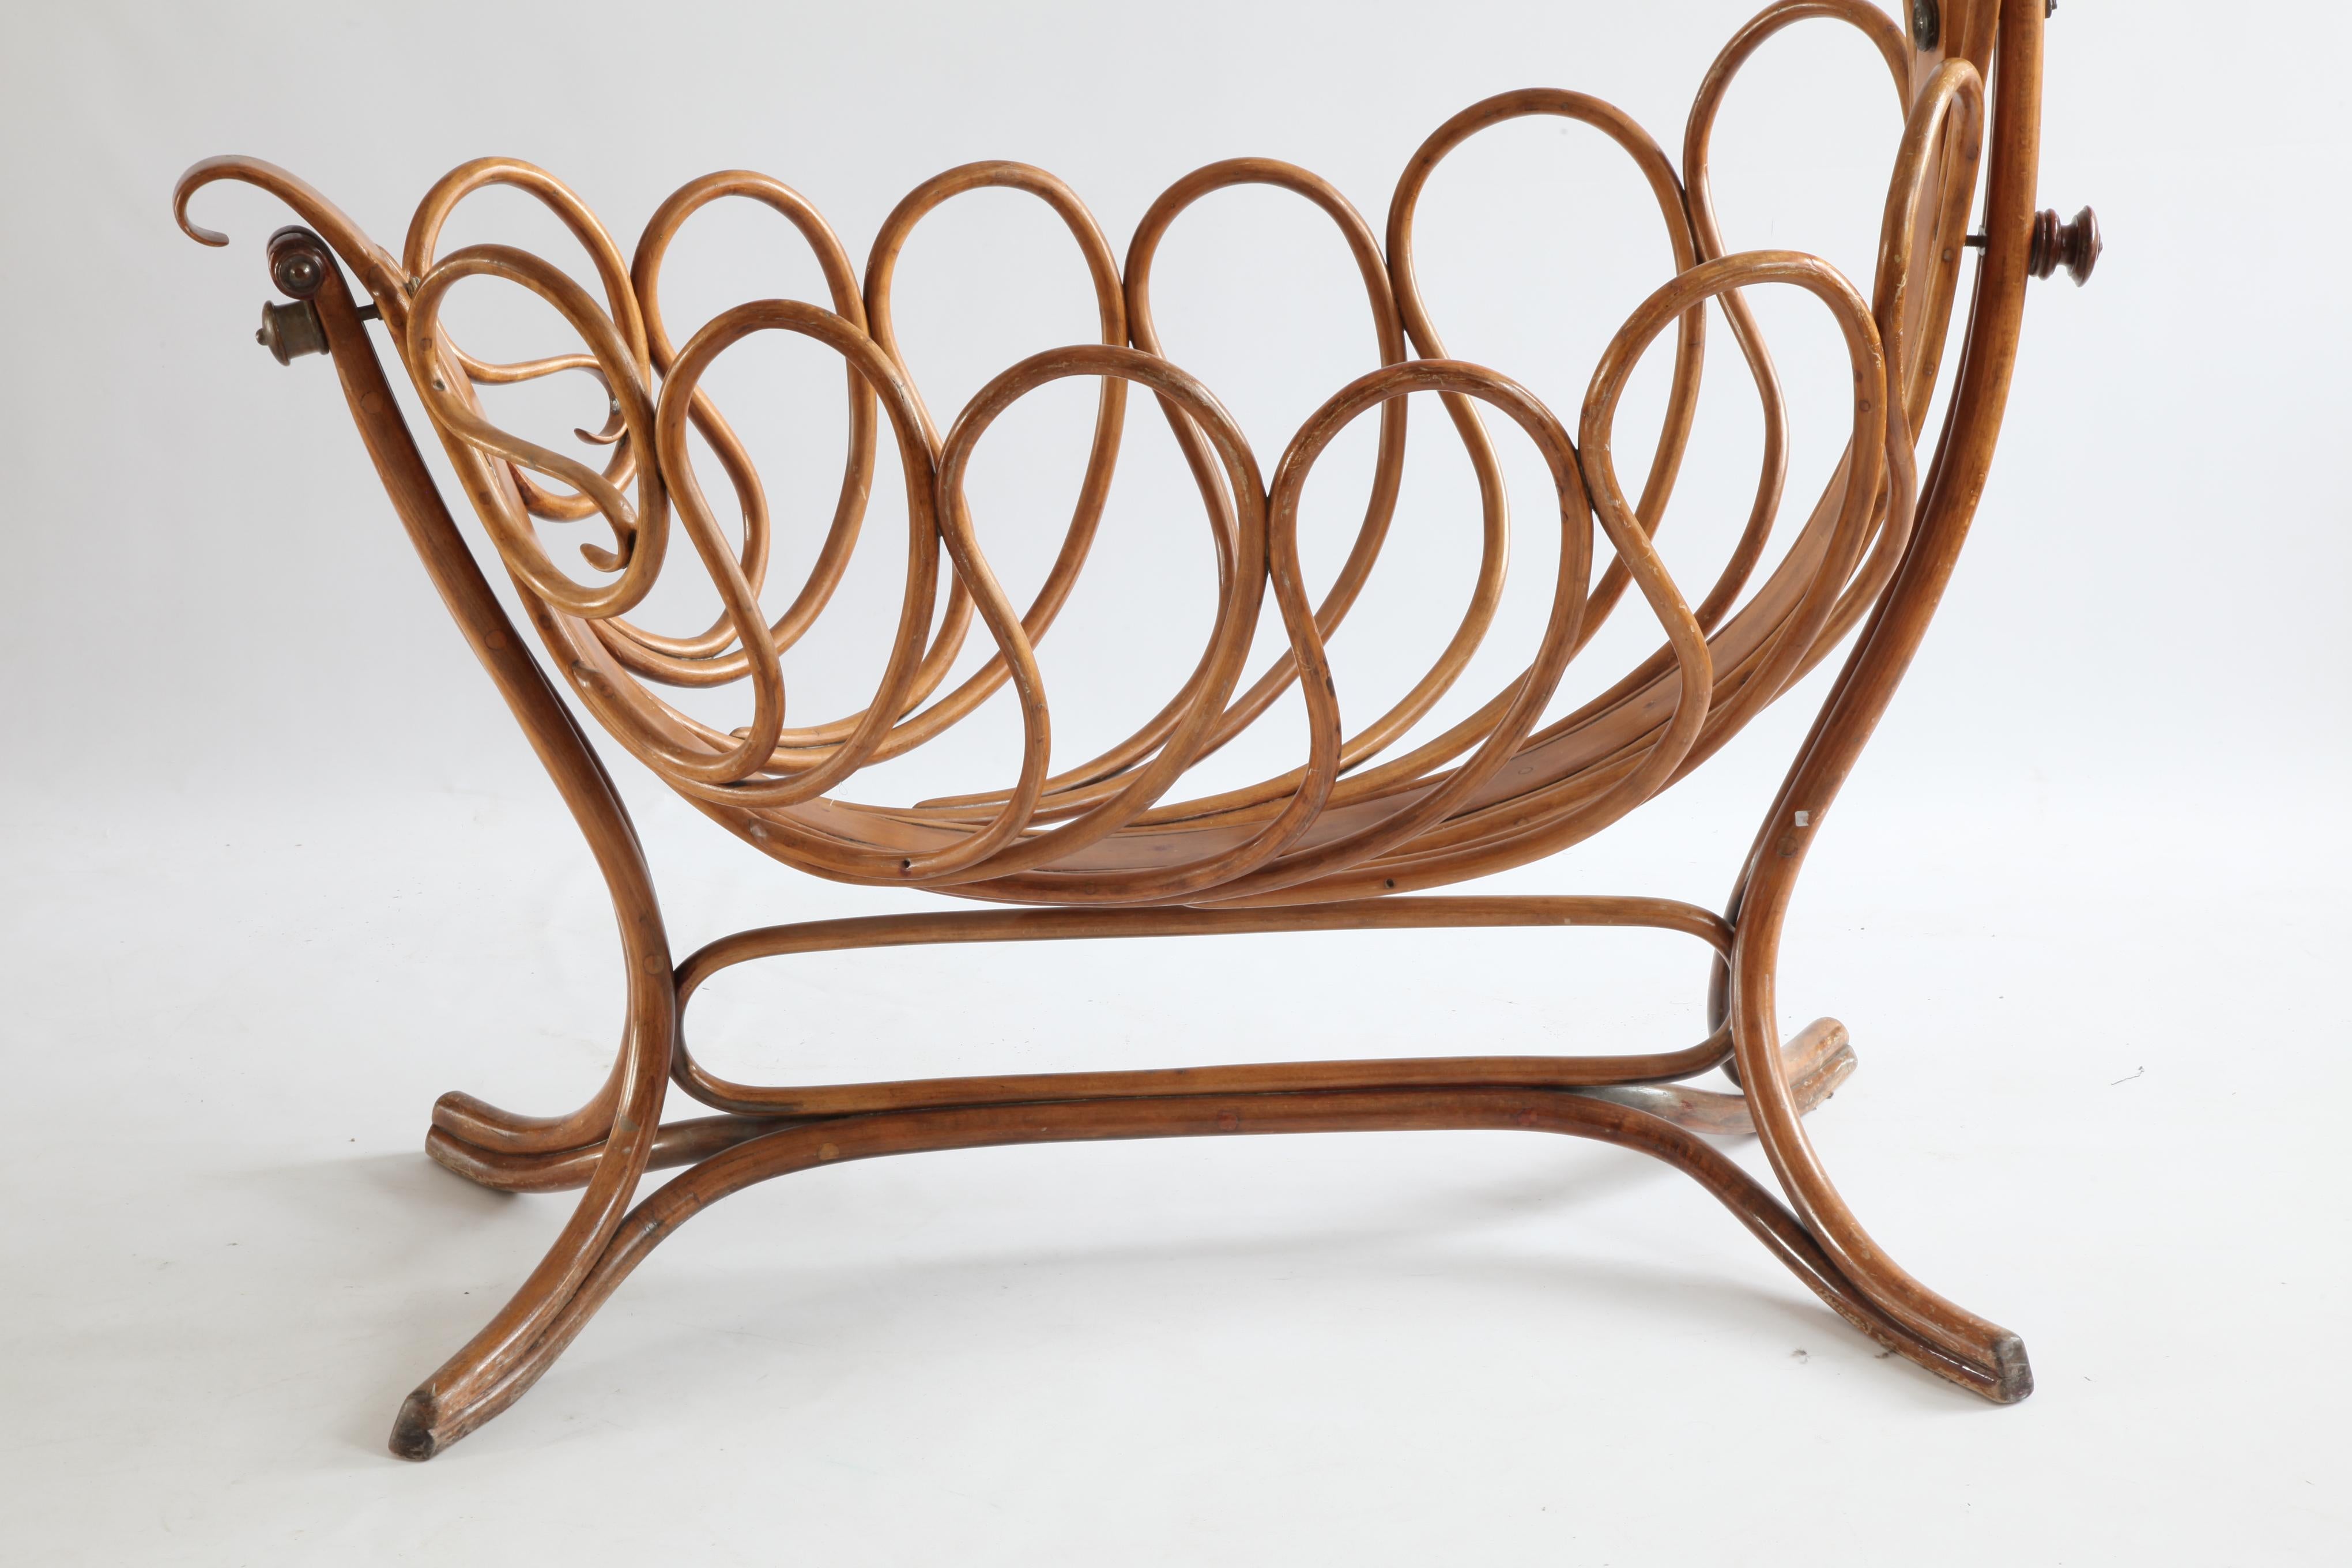 Rare French Bentwood Cradle in the Thonet Style, Late 19th Century For Sale 5